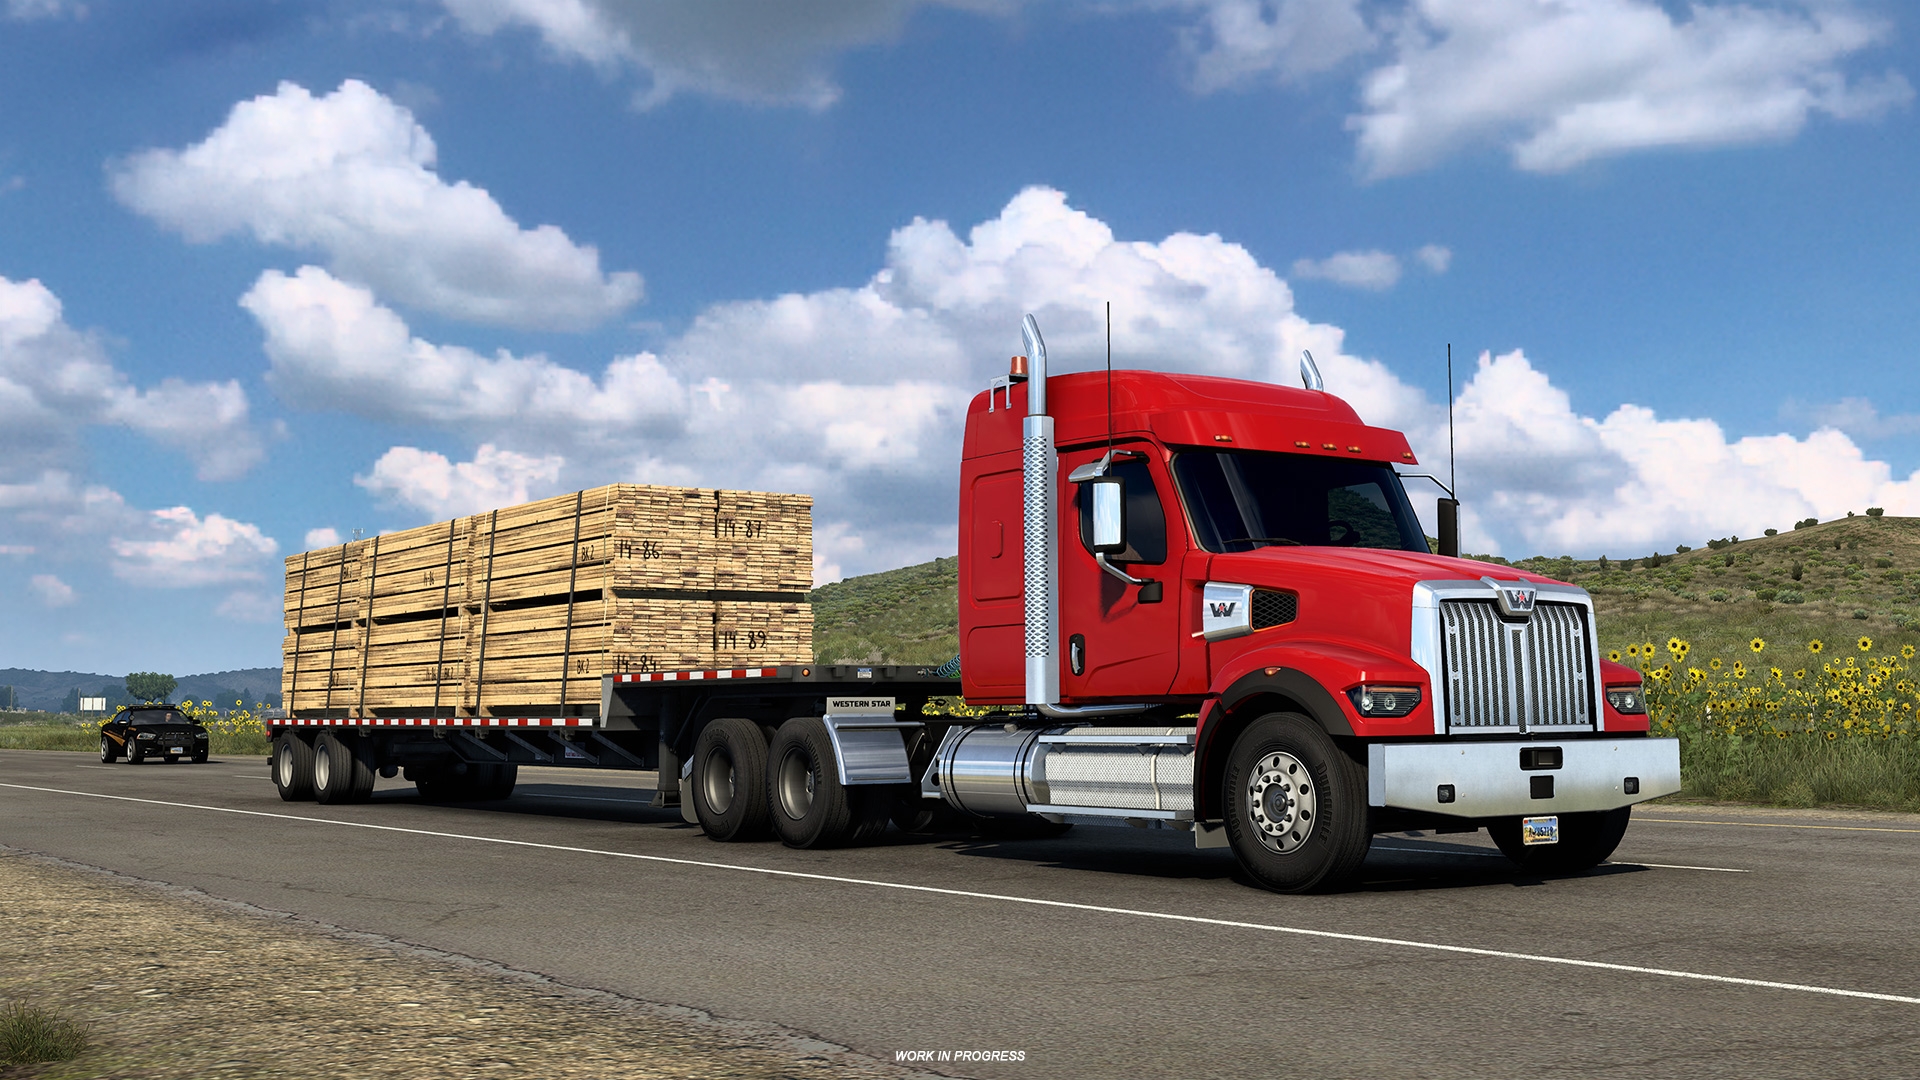 Truck Simulator 1.44 adds a new ownable trailer type